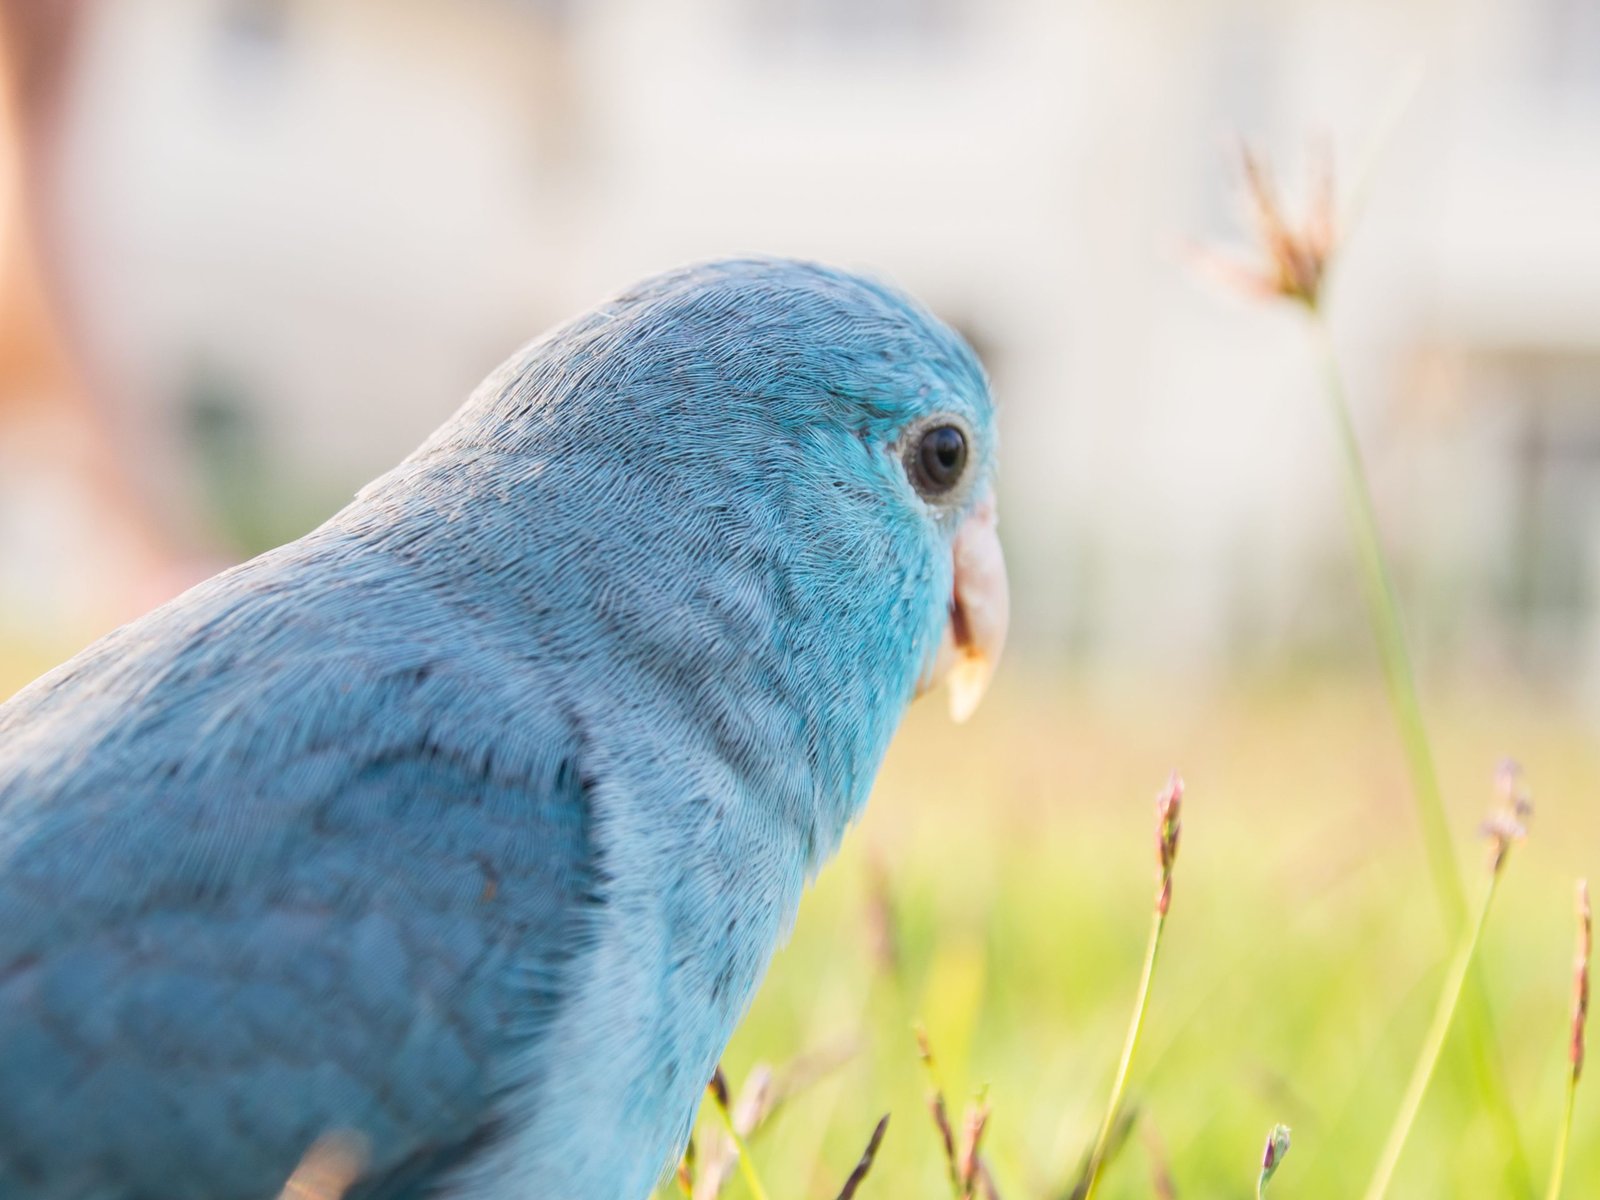 9 Top Blue Parrot Species to Keep As Pets